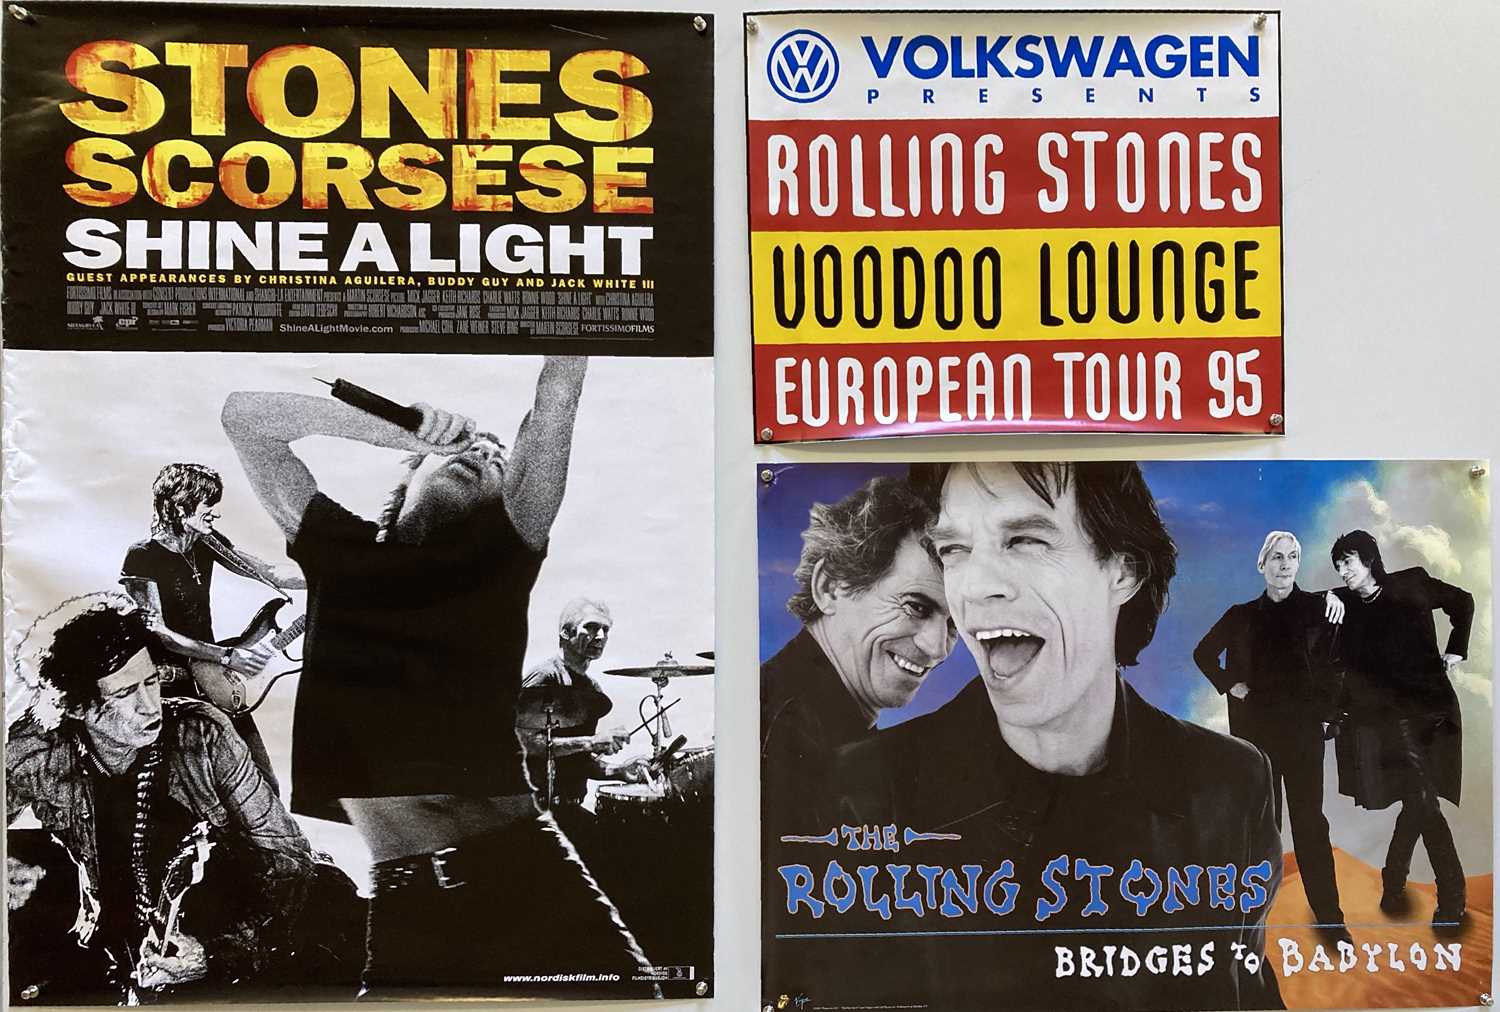 ROLLING STONES VW WINDOW STICKERS AND POSTERS.